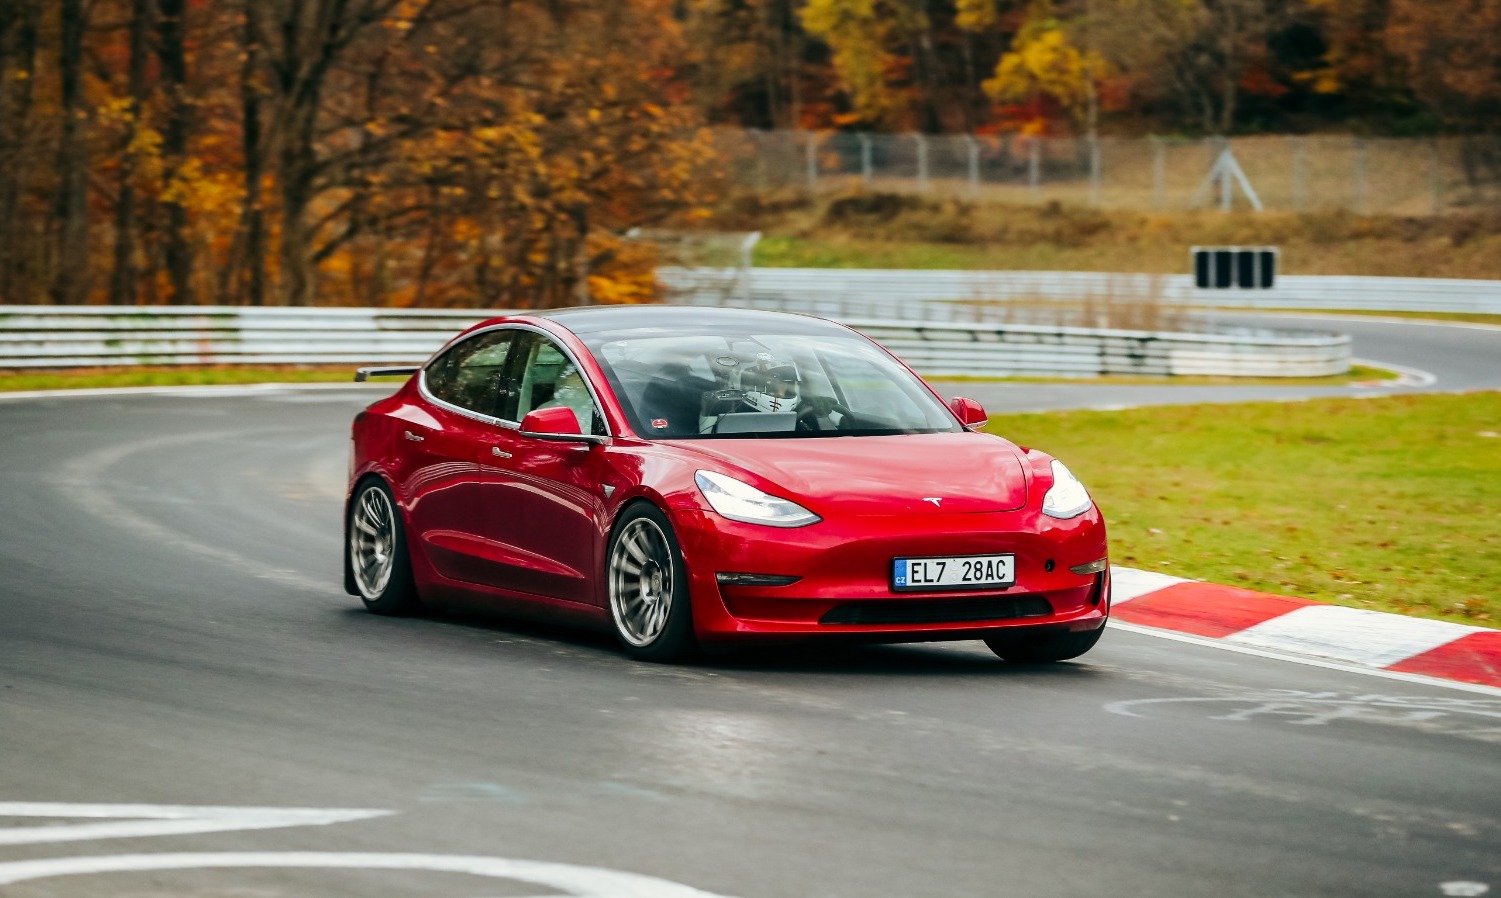 Tesla Model 3 takes on the Nurburgring and comes within striking distance of the Porsche Taycan’s record